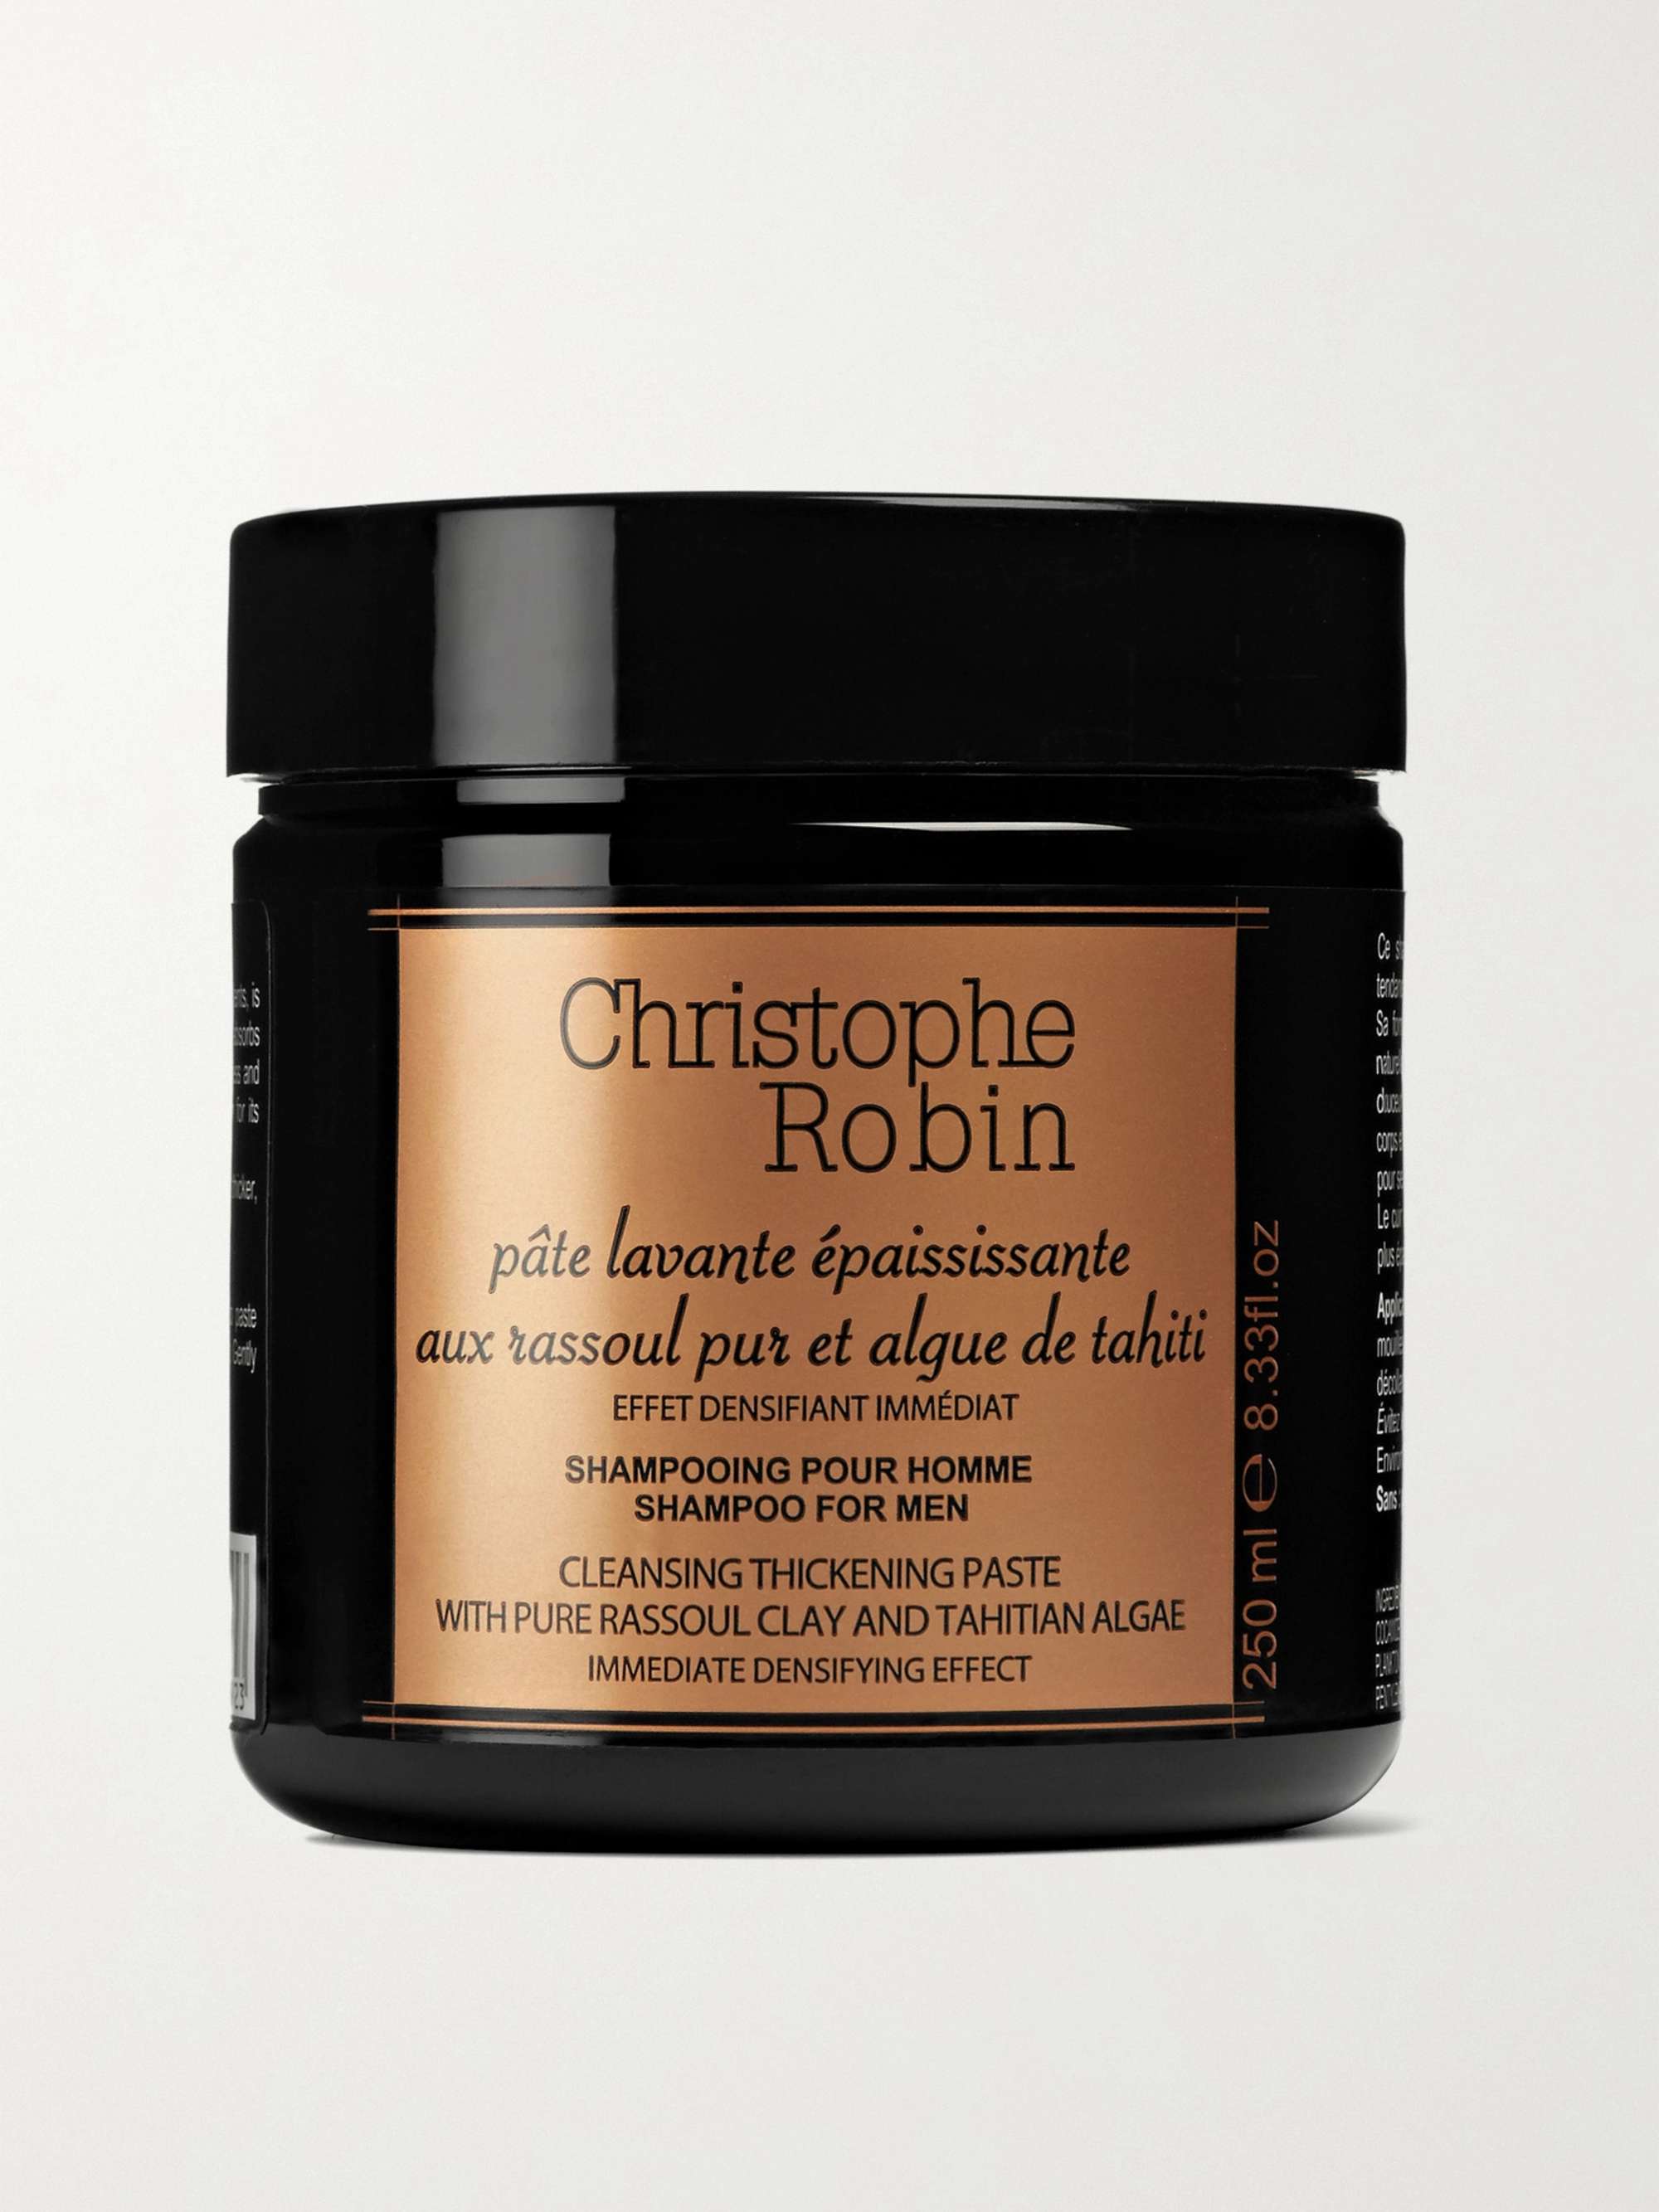 CHRISTOPHE ROBIN Cleansing Thickening Paste, 250ml